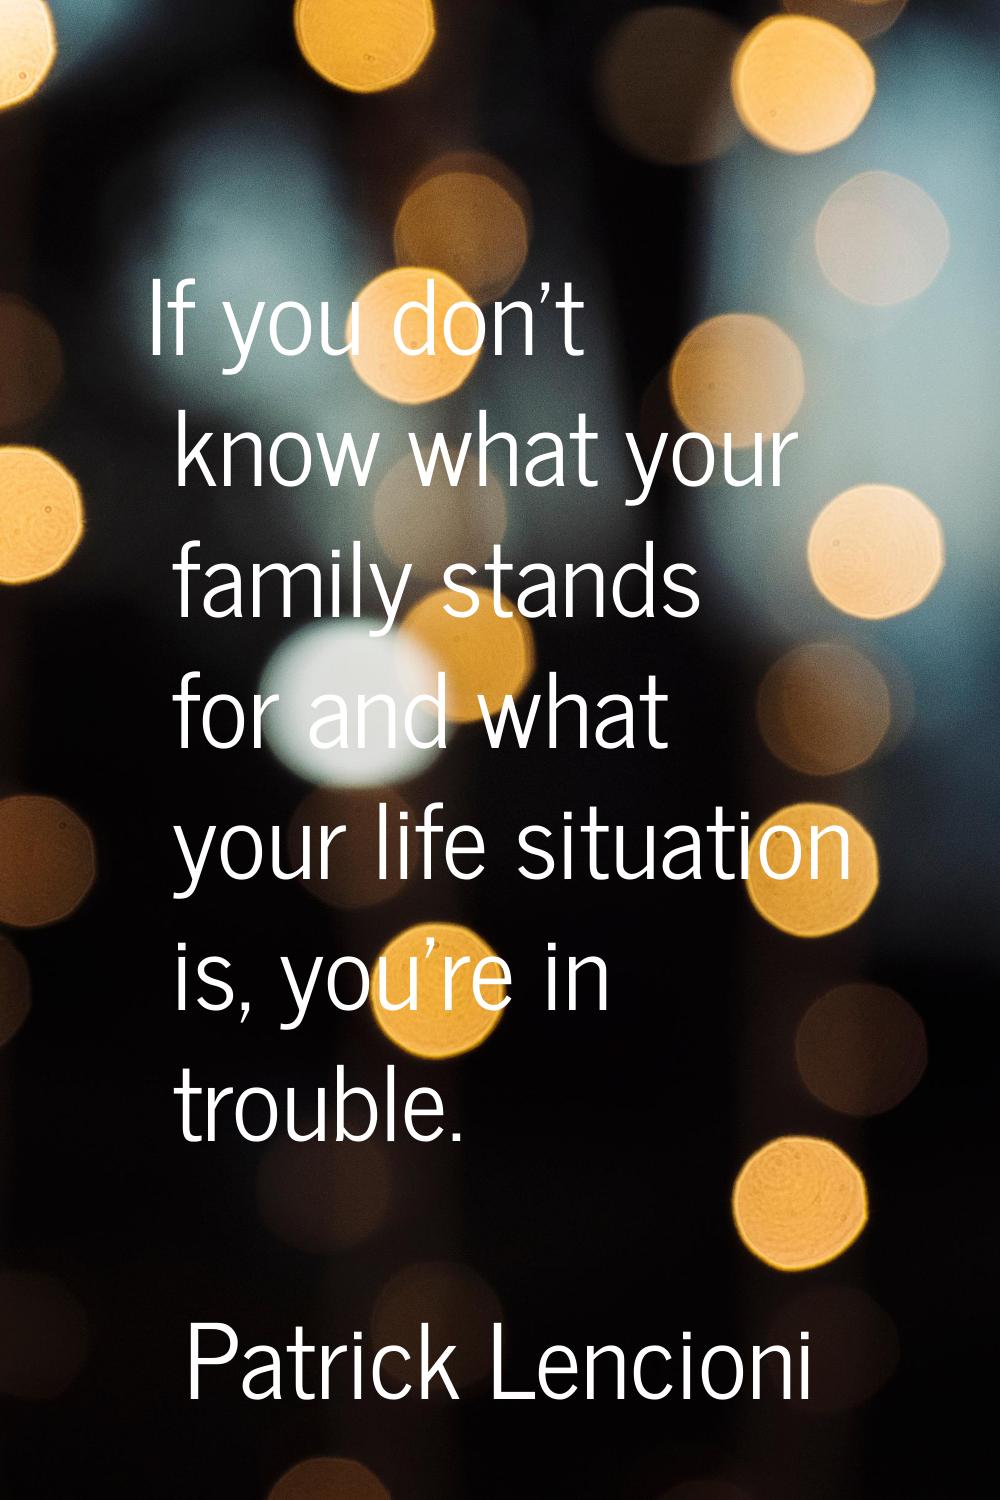 If you don't know what your family stands for and what your life situation is, you're in trouble.